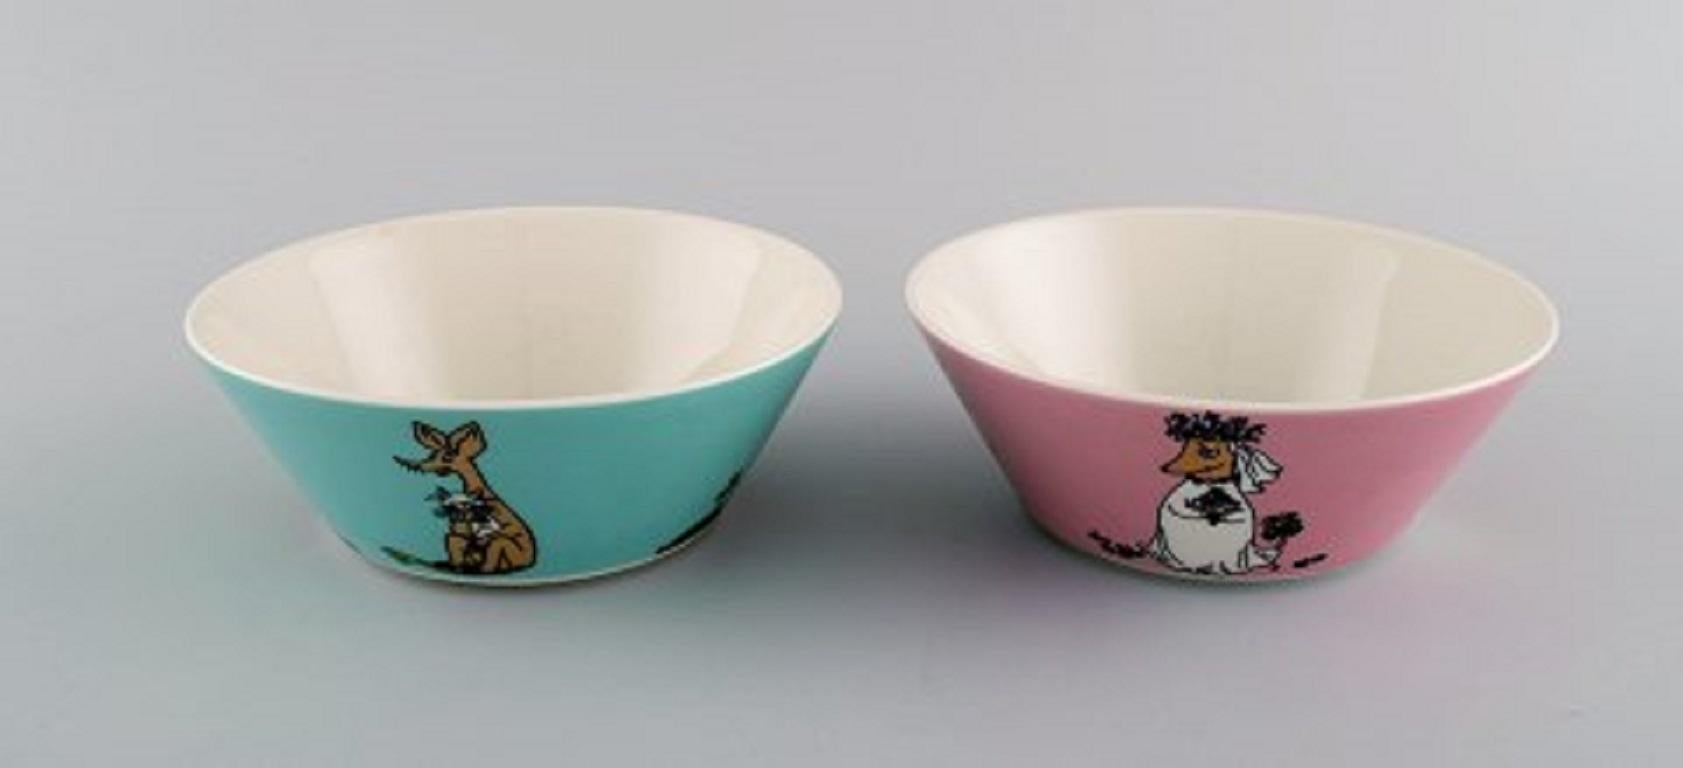 Arabia, Finland. Two porcelain bowls with motifs from 